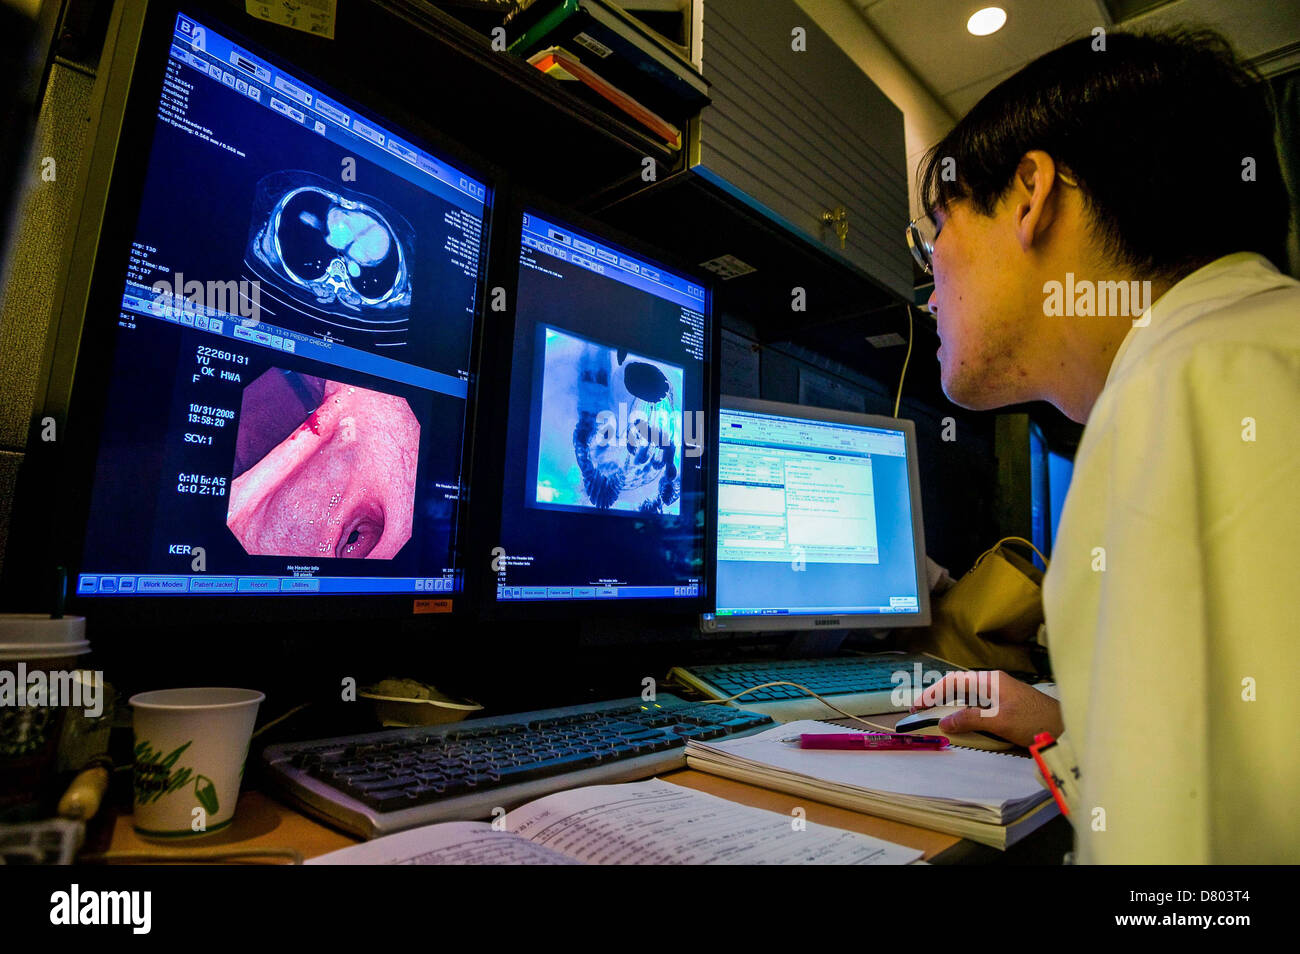 A doctor views endoscopic images, as part of patient diagnosis, in the Reading Room, at a Medical Center. Stock Photo